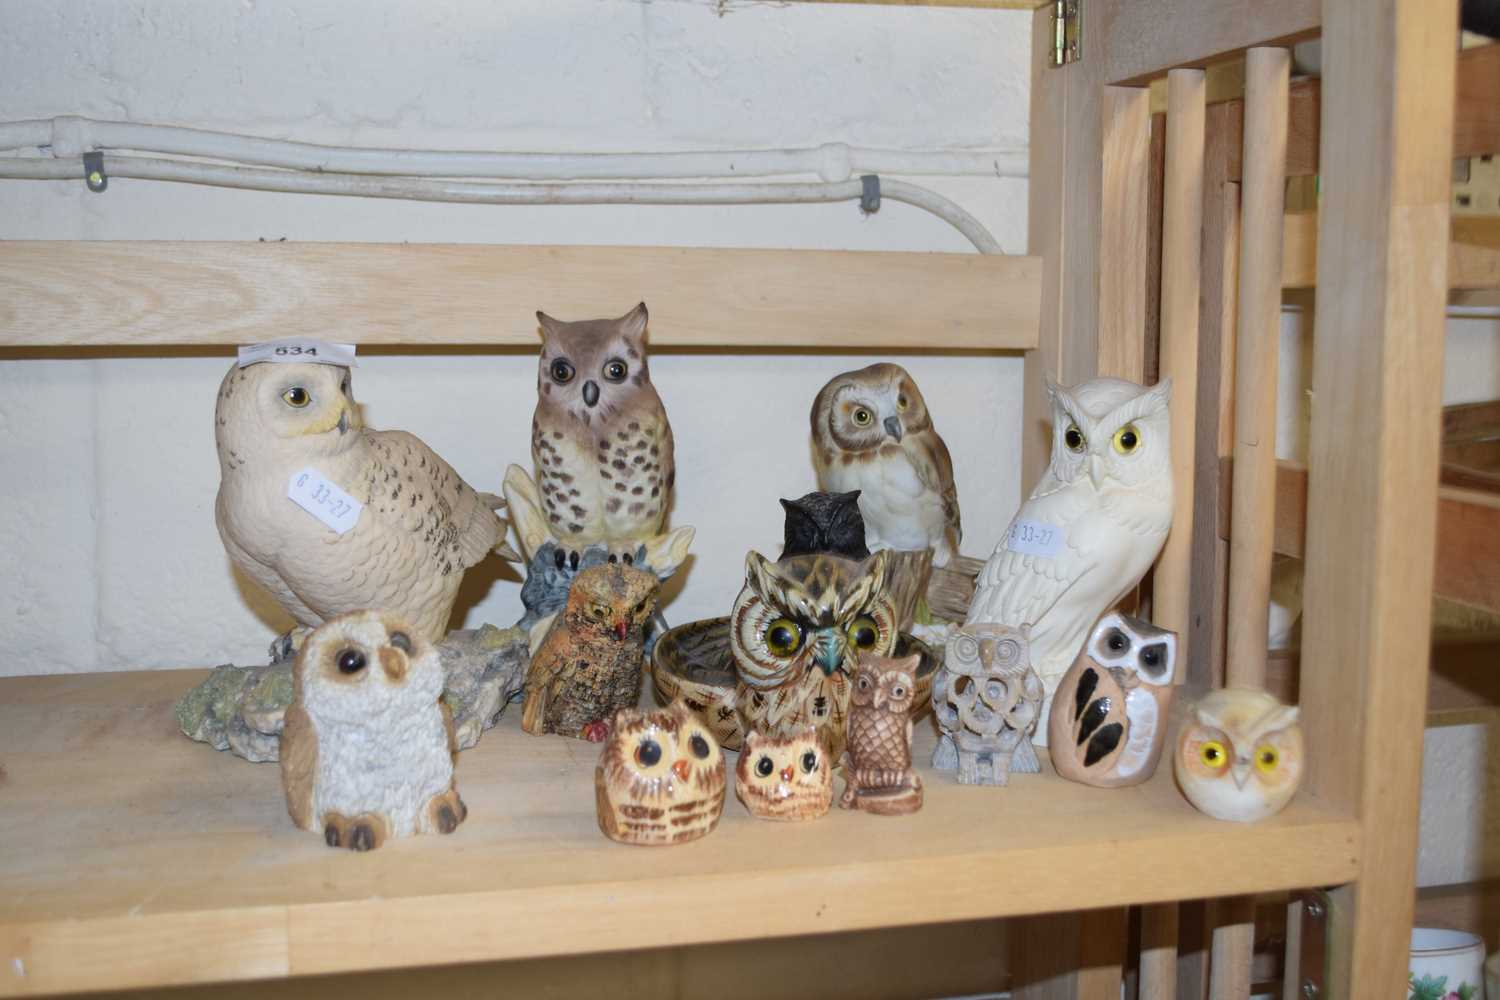 COLLECTION OF MODEL OWLS